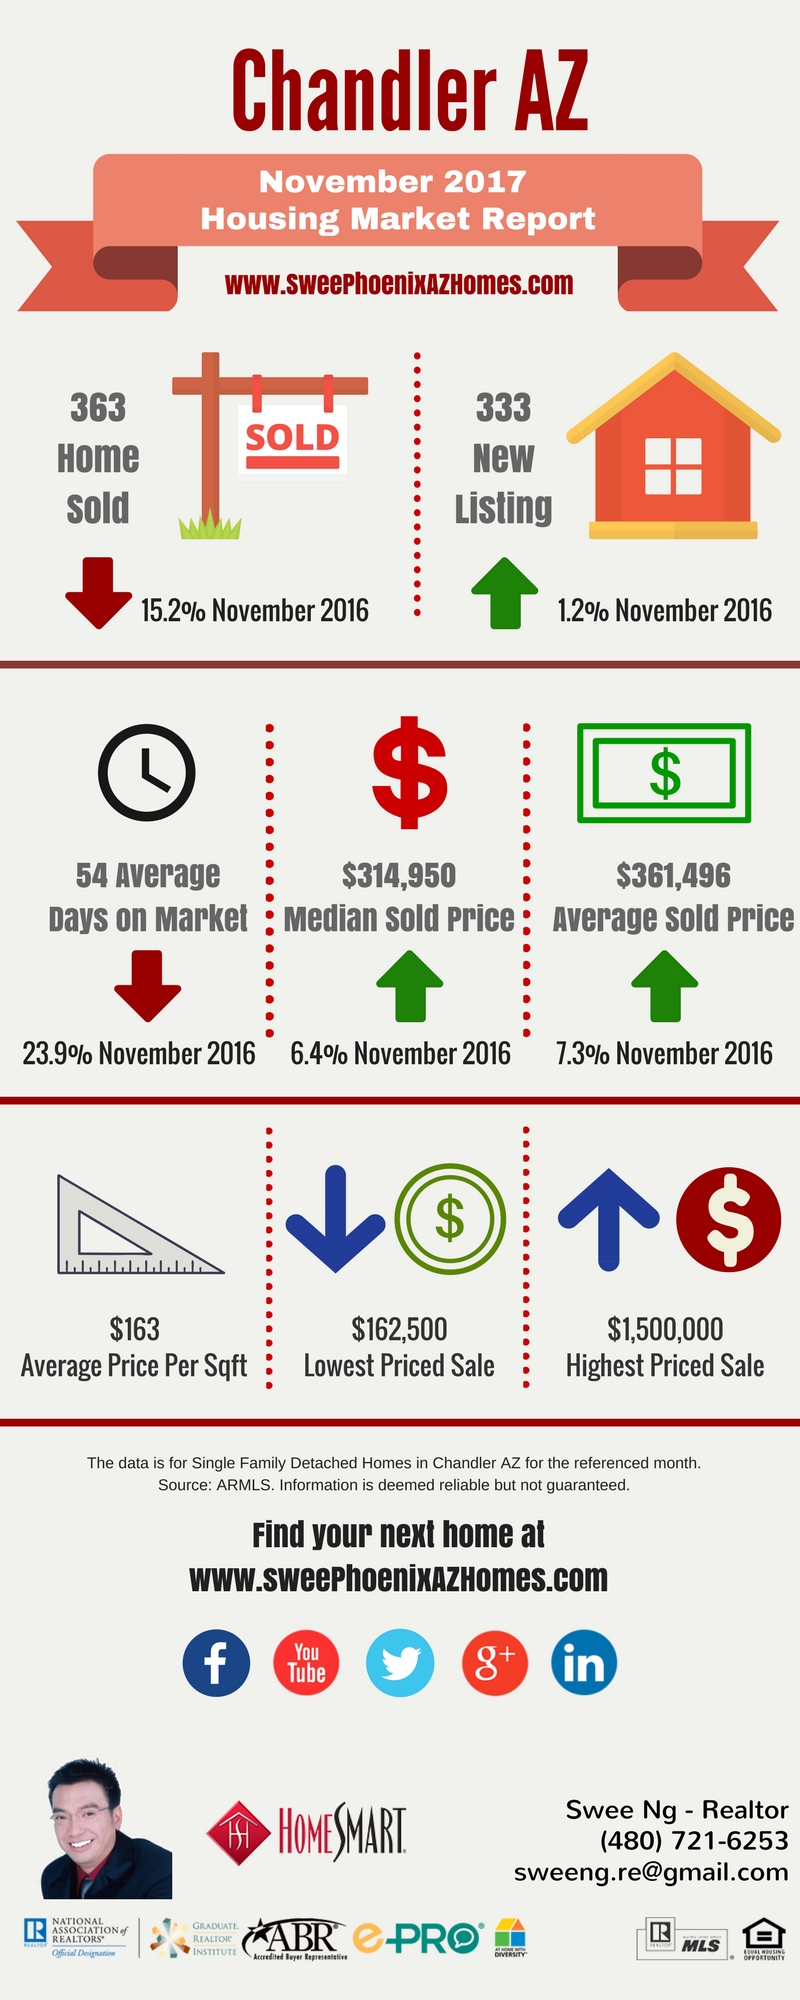 Chandler AZ Housing Market Update November 2017 by Swee Ng, House Value and Real Estate Listings